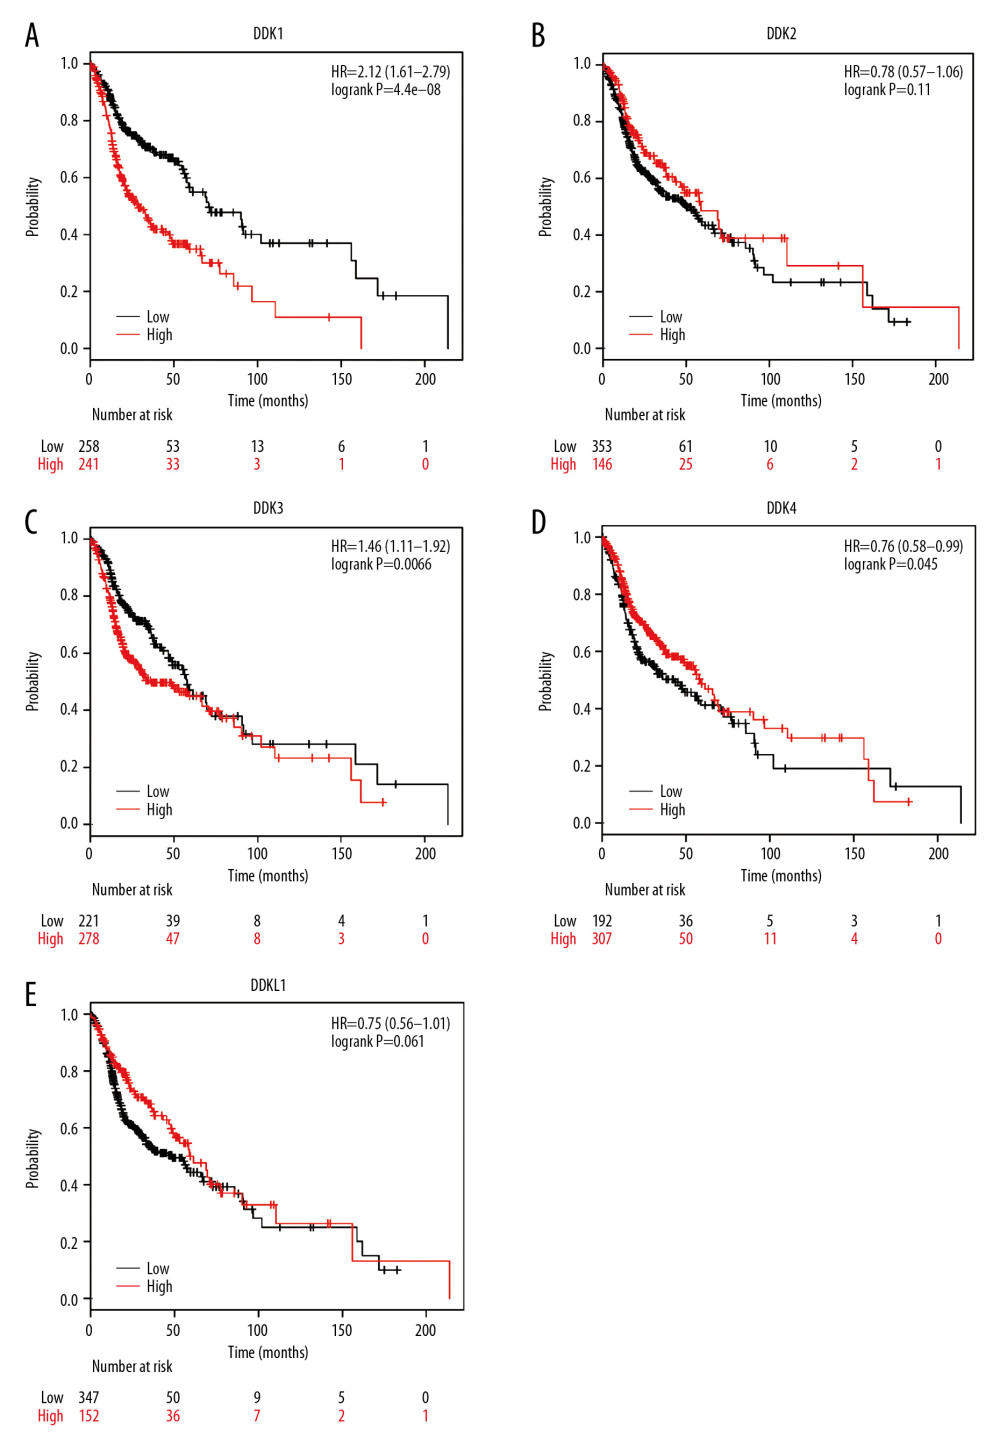 (A–E) Prognostic value of the mRNA expression of distinct DKKs in HNSCC patients (Kaplan-Meier Plotter). DKK – Dickkopf Wnt signaling pathway inhibitor; HNSCC – head and neck squamous cell carcinoma.